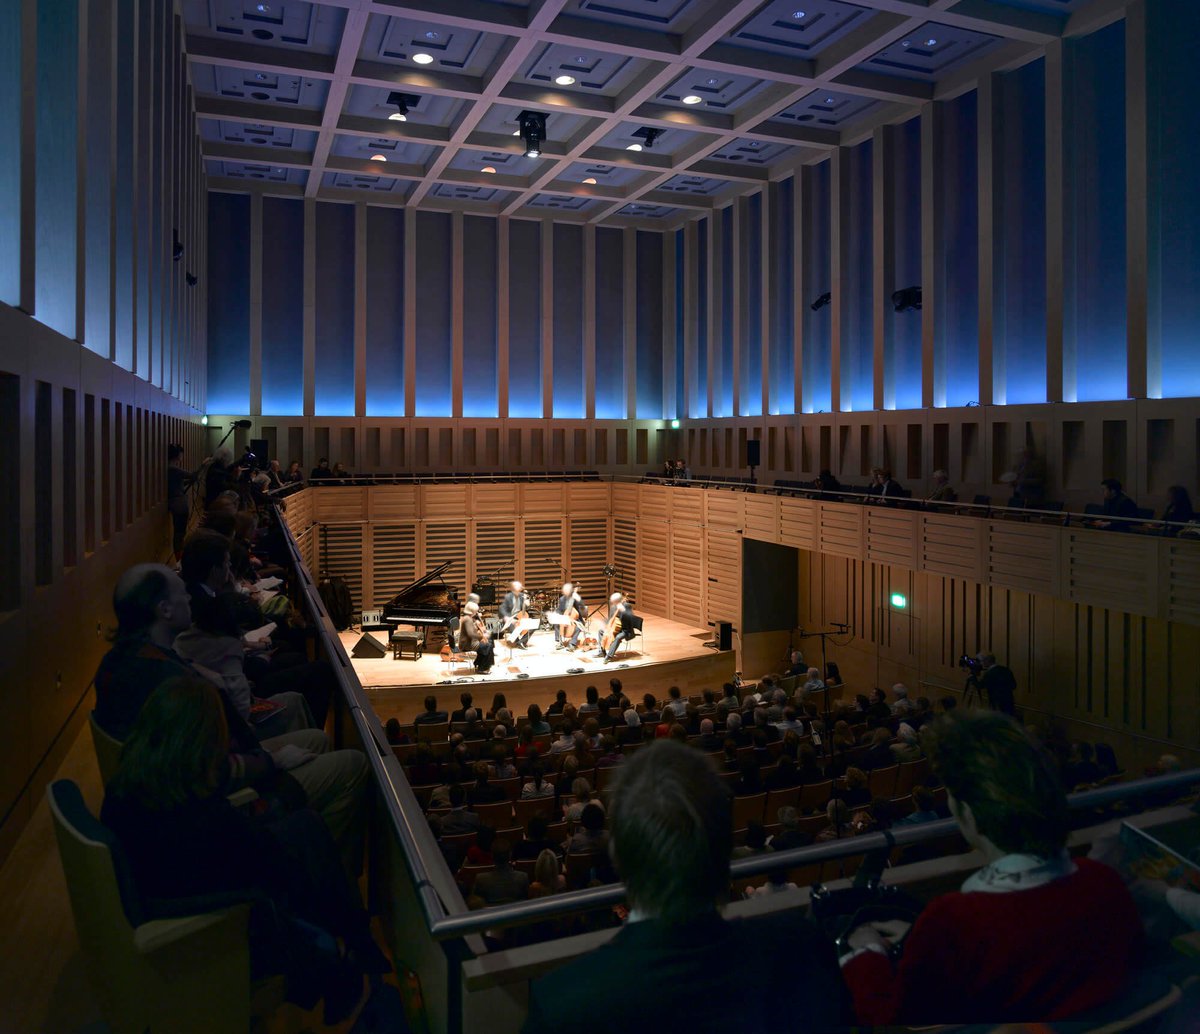 Google Maps now includes a 360° interior view of Hall One @KingsPlace. The recital hall won the Gold Award at the 2009 #WoodAwards and incredibly all of the veneers used came from a single 500 year old oak tree. goo.gl/maps/9H6ECnLPN… … #KP10Years